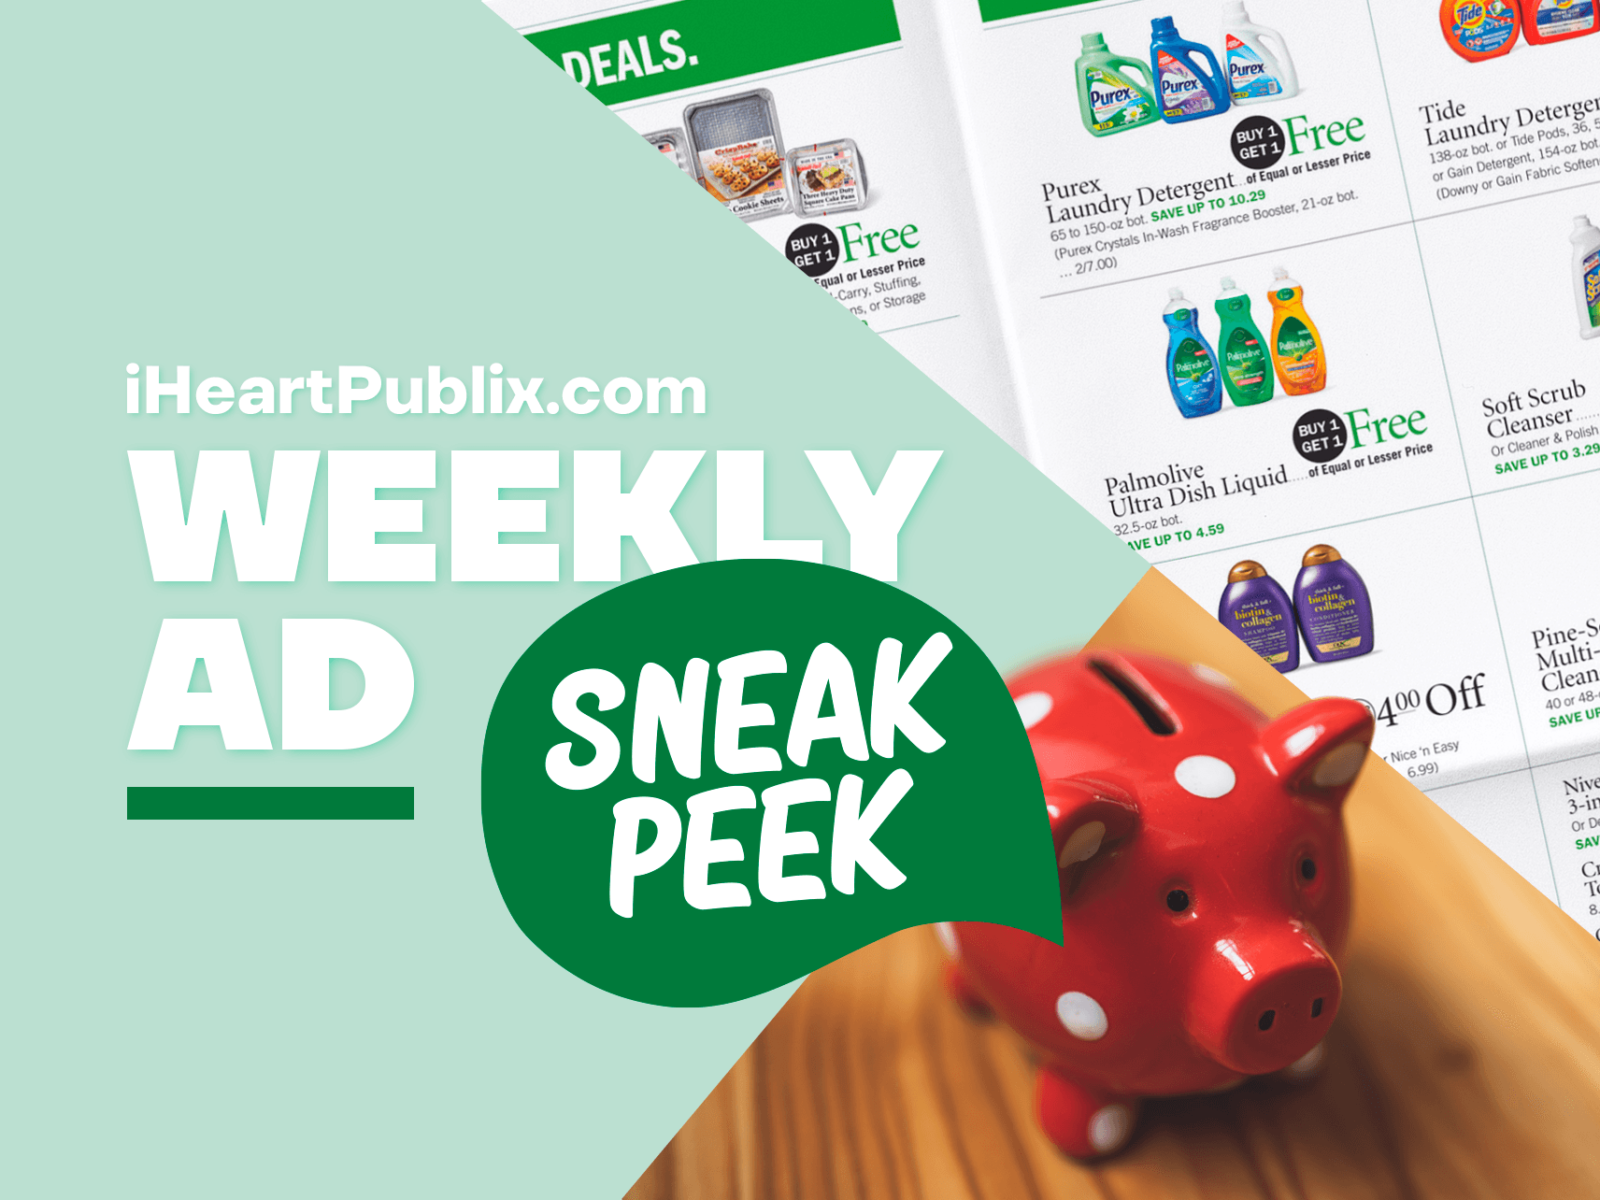 Publix Ad & Coupons Week Of 7/14 to 7/20 (7/13 to 7/19 For Some)